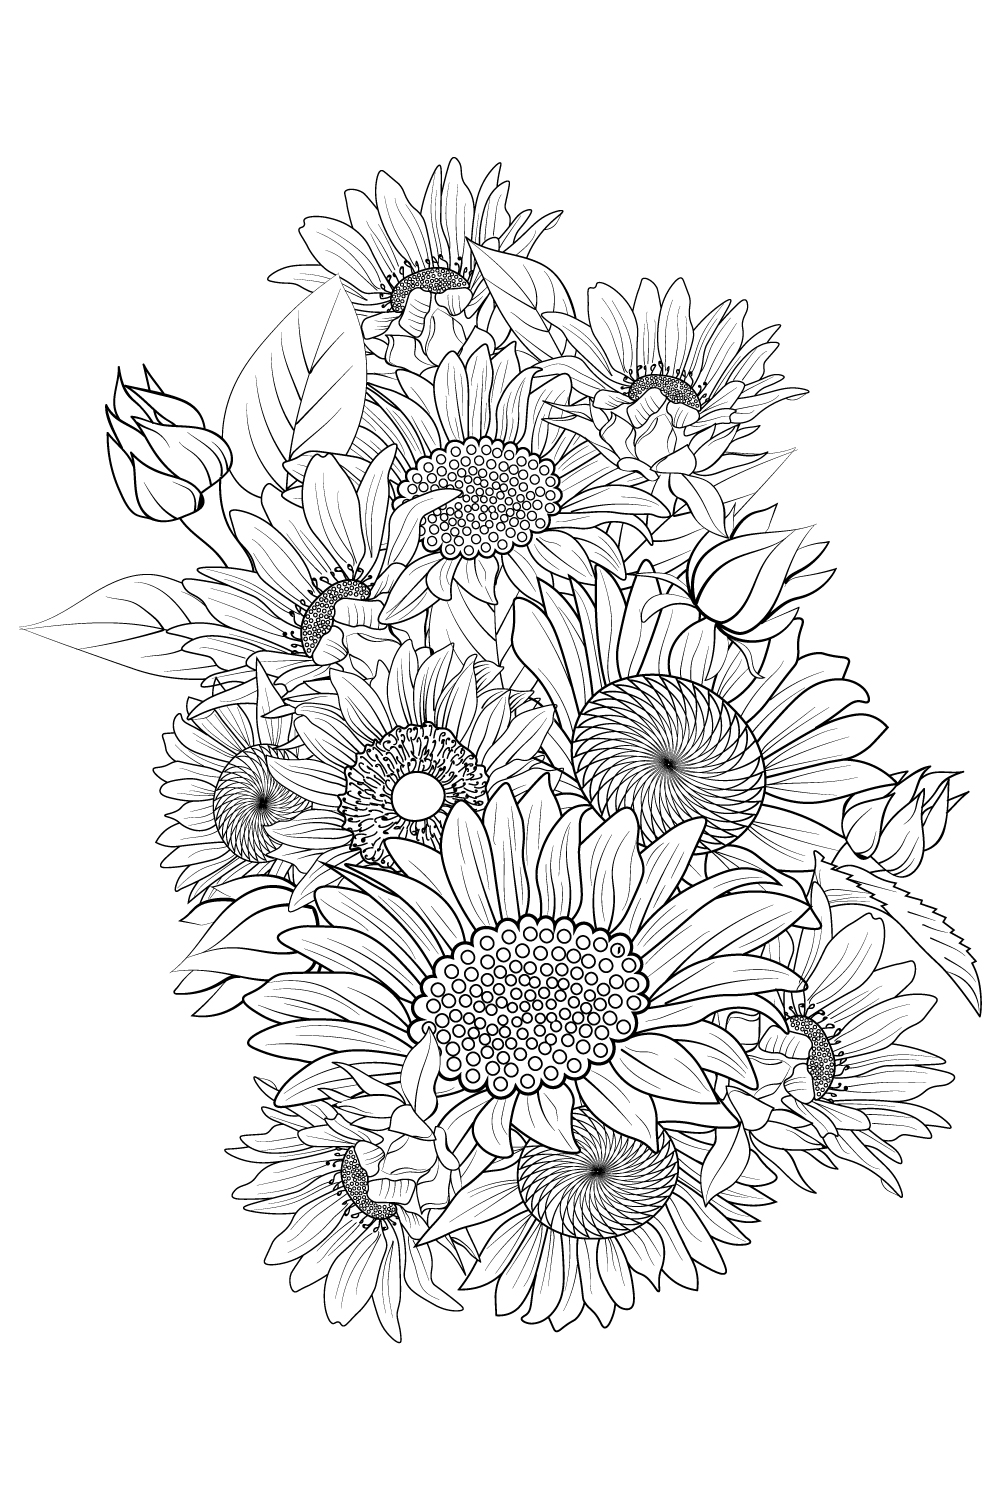 How To Draw A Sunflower, Realistic Sunflower, Step by Step, Drawing Guide,  by finalprodigy - DragoArt